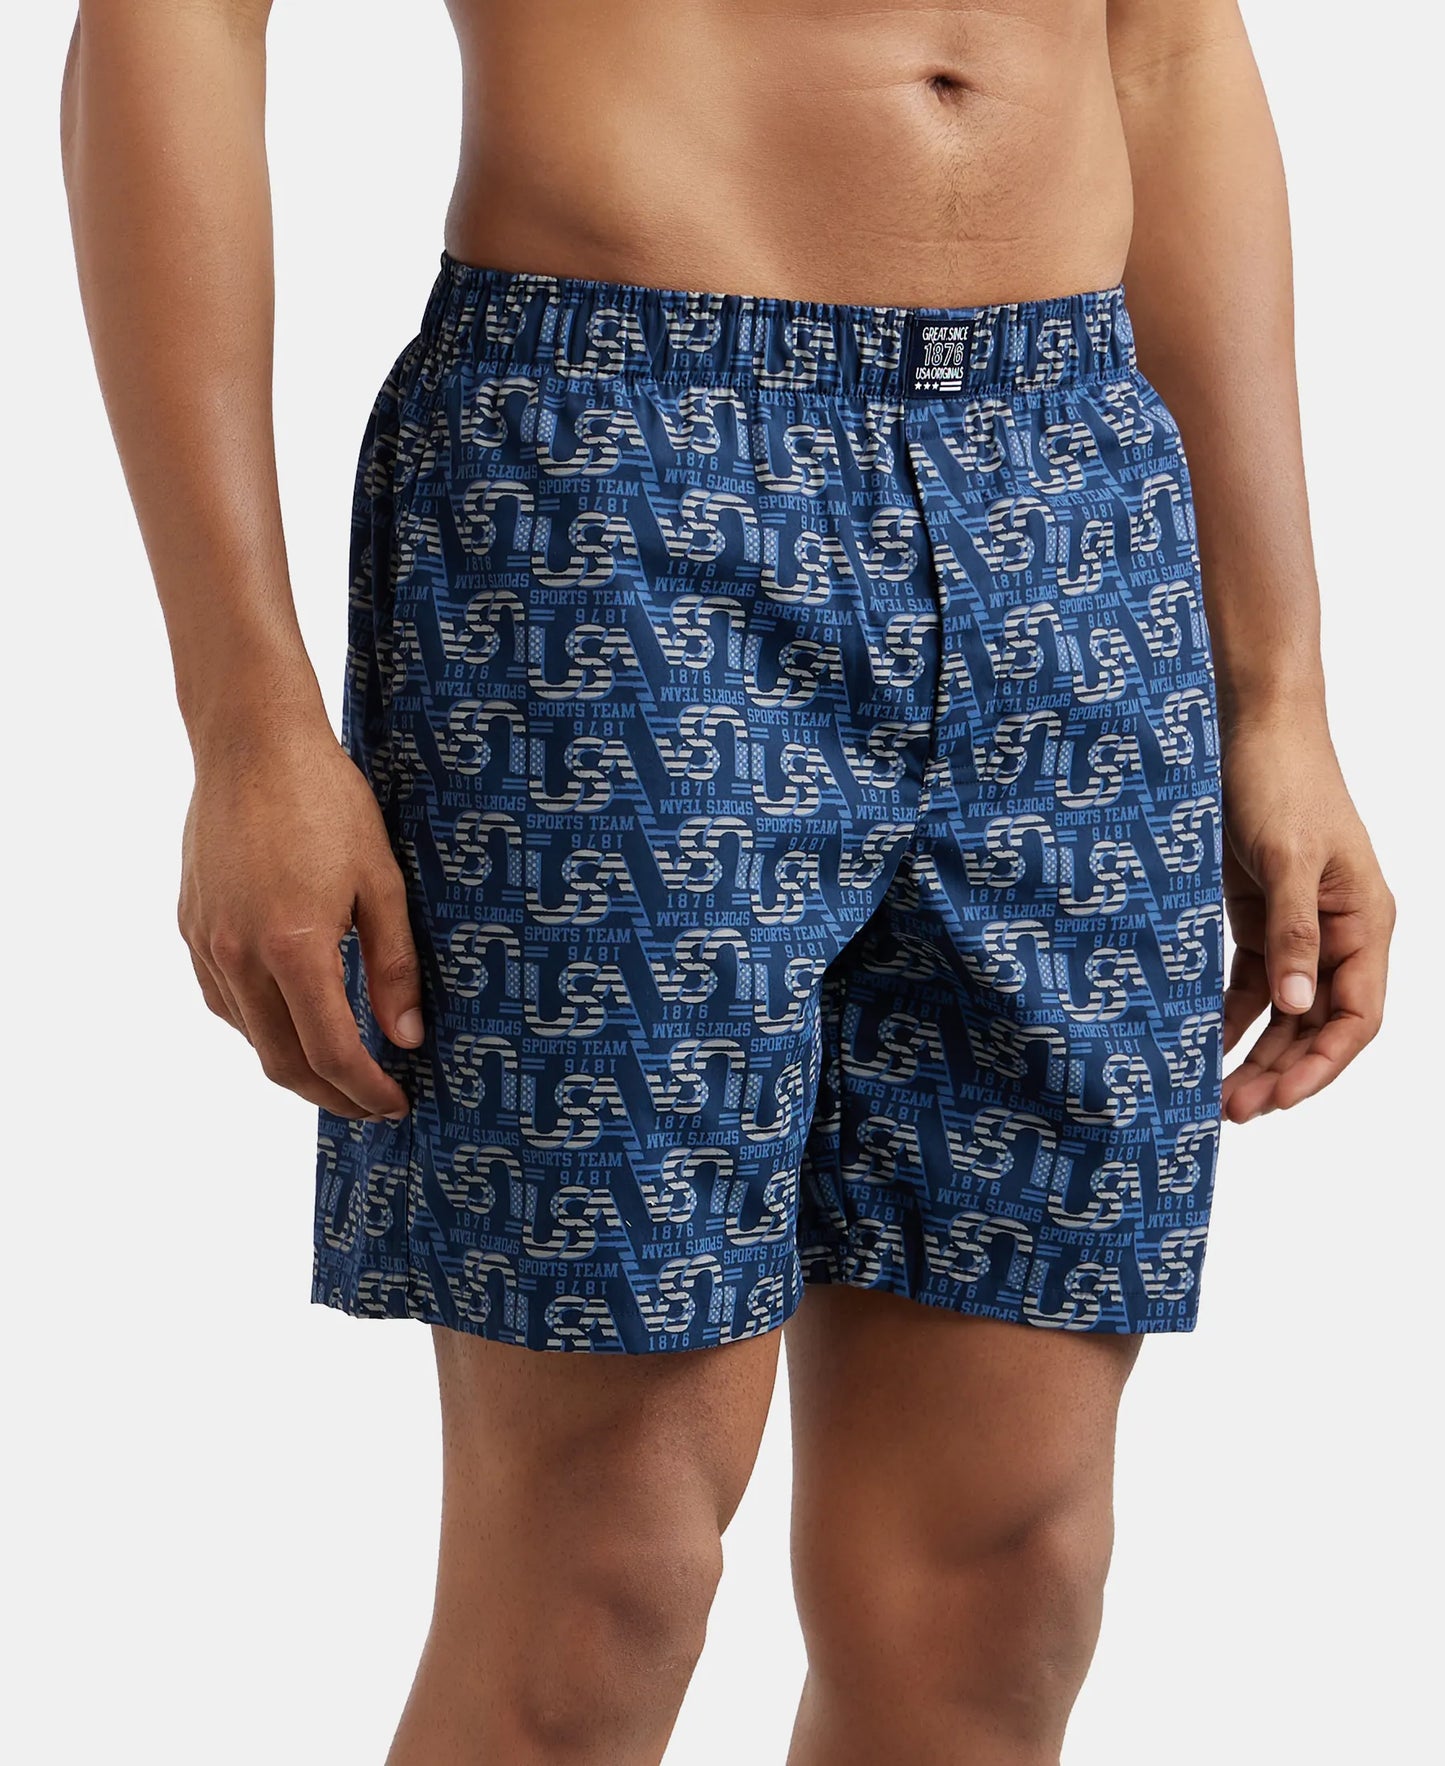 Super Combed Mercerized Cotton Woven Printed Boxer Shorts with Side Pocket - Navy-2